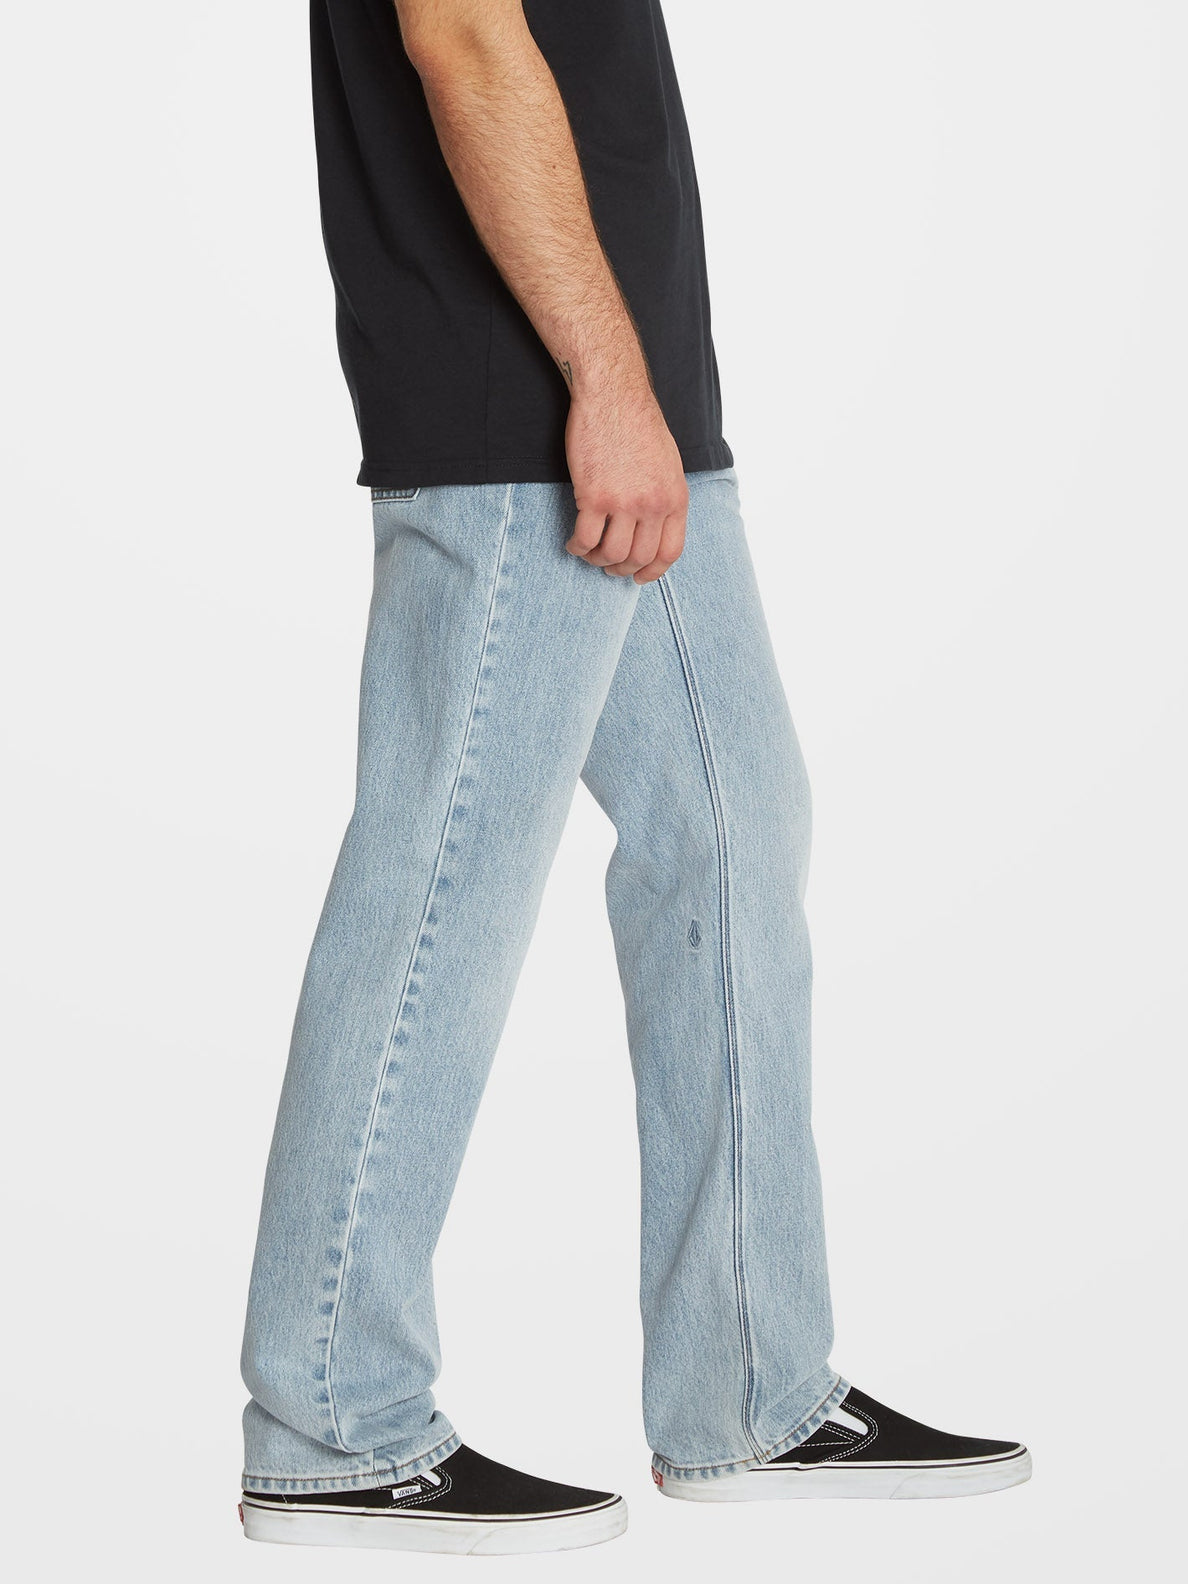 Solver Jeans - HEAVY WORN FADED (A1912303_HWR) [1]